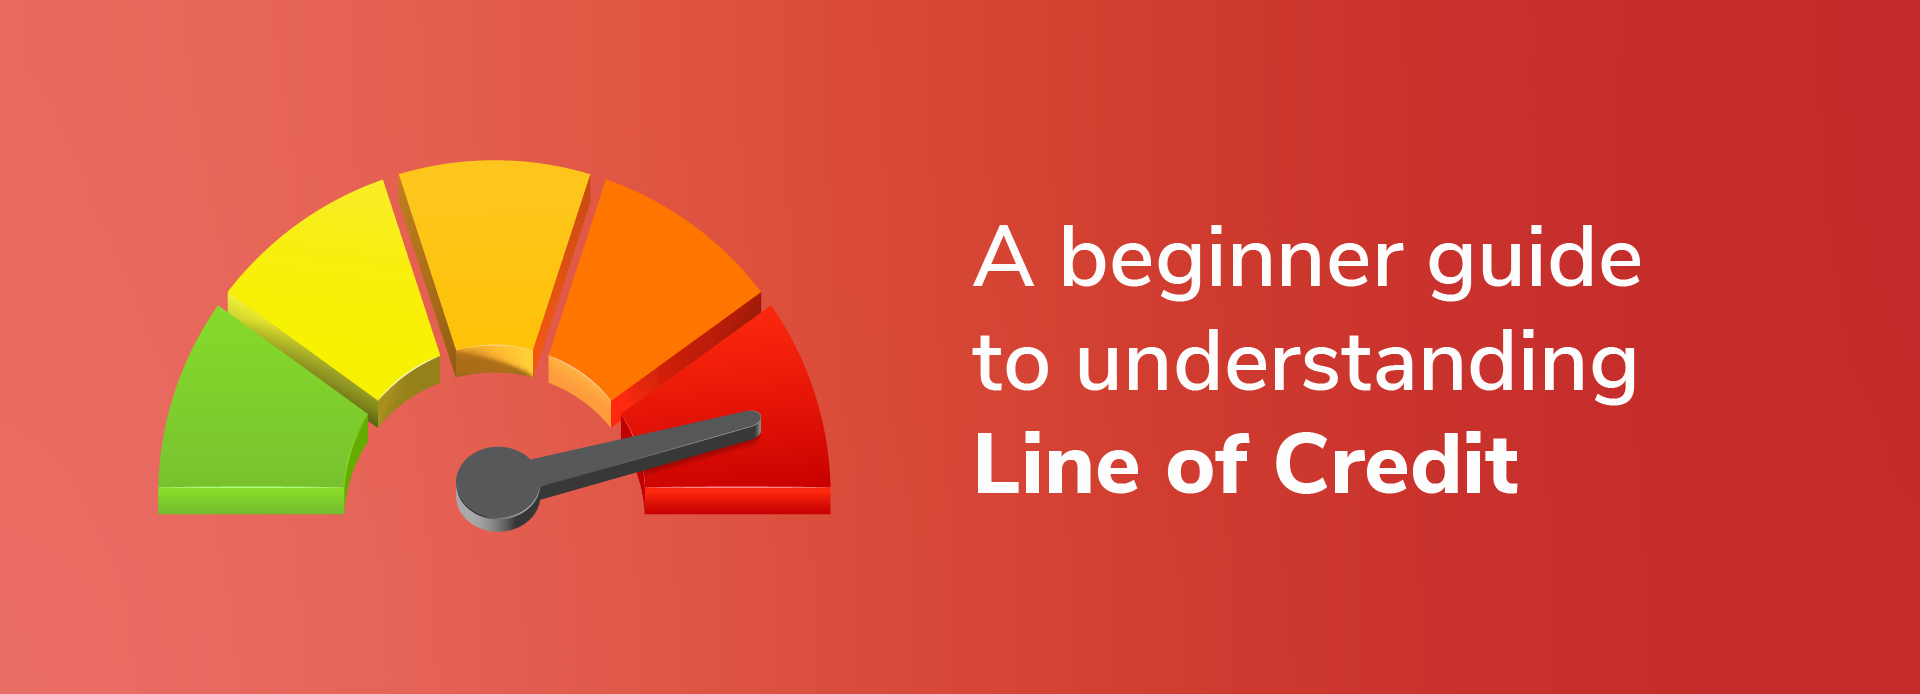 What Is a Line of Credit? A Complete Guide for Beginners